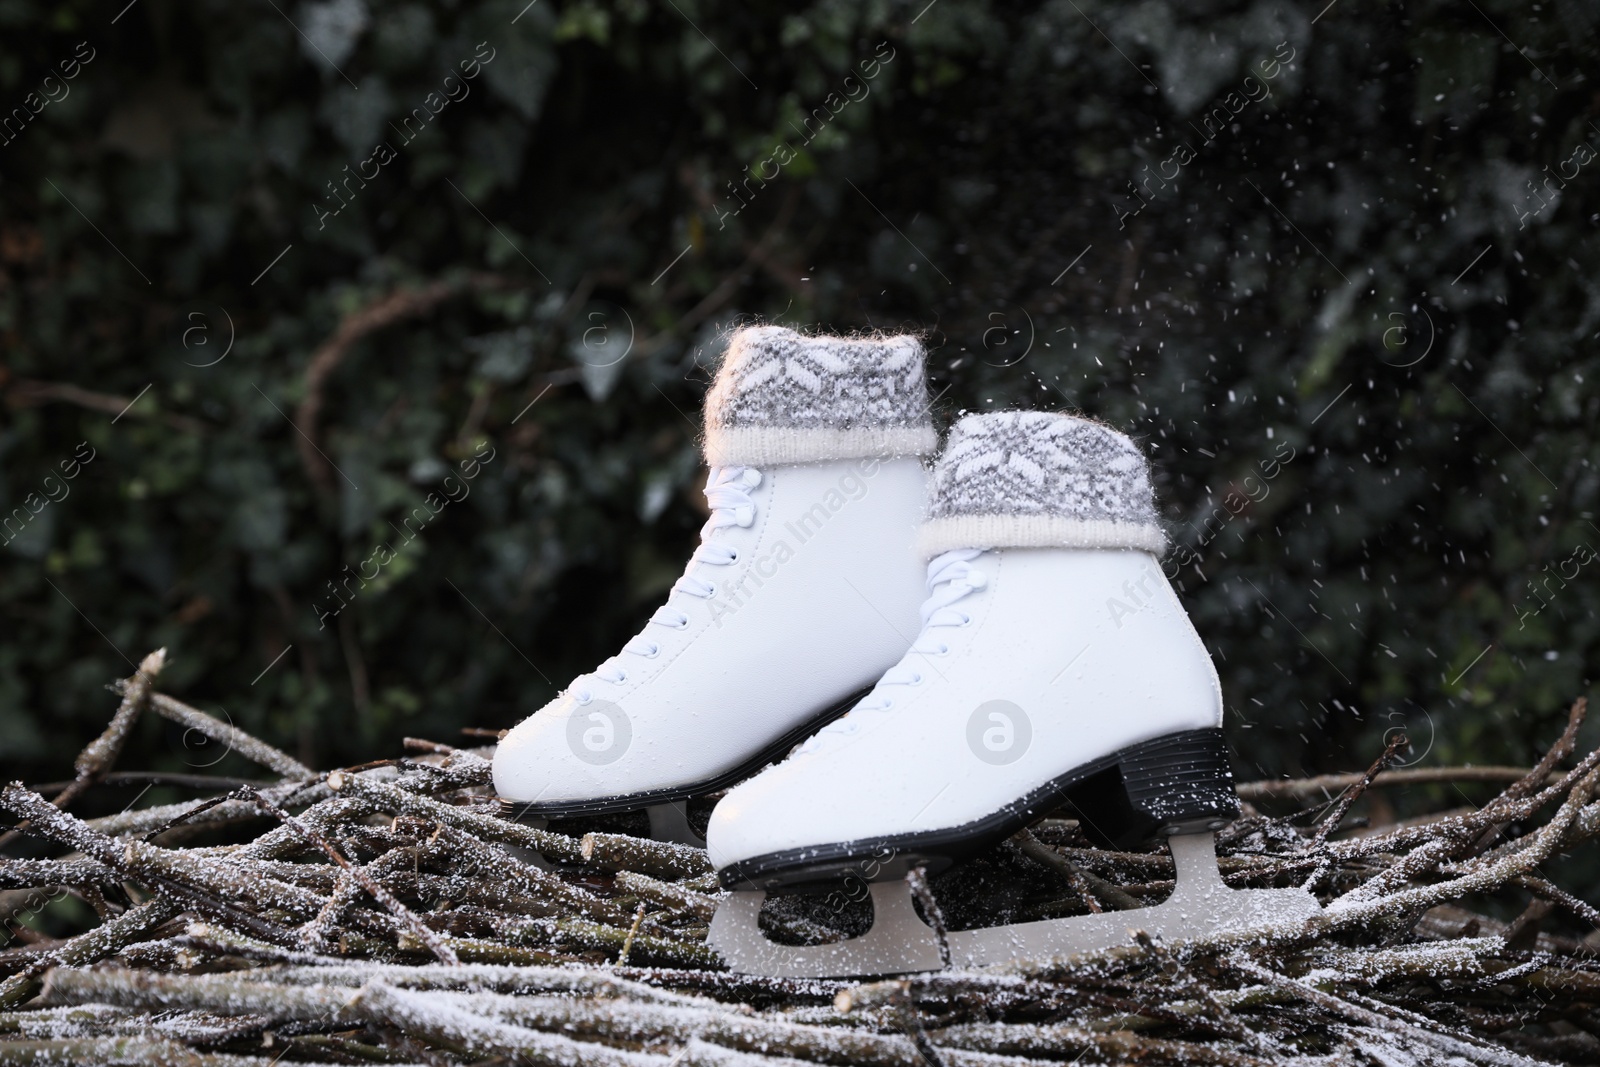 Photo of Snow falling on pair of ice skates outdoors